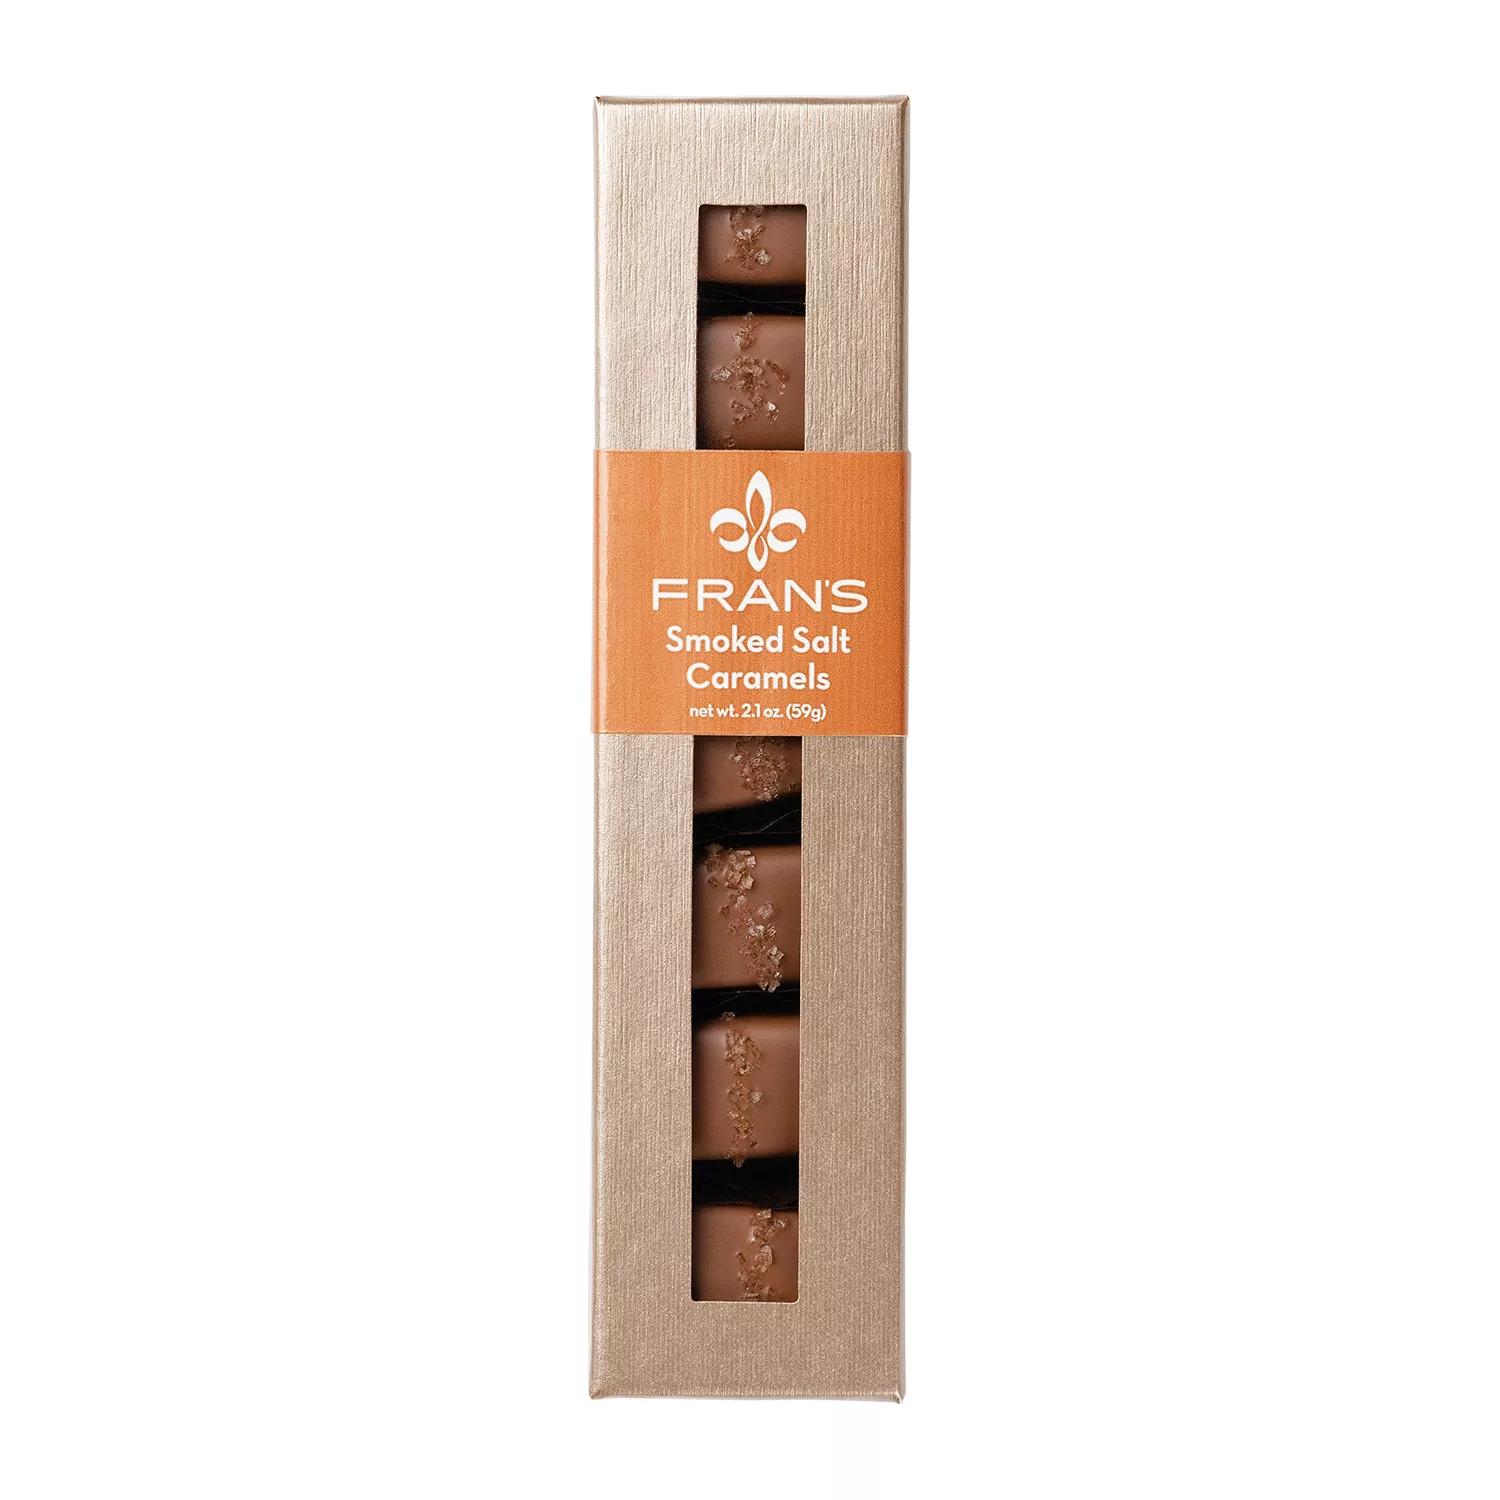 fran's smoked salt caramels - How long does Fran's chocolate last